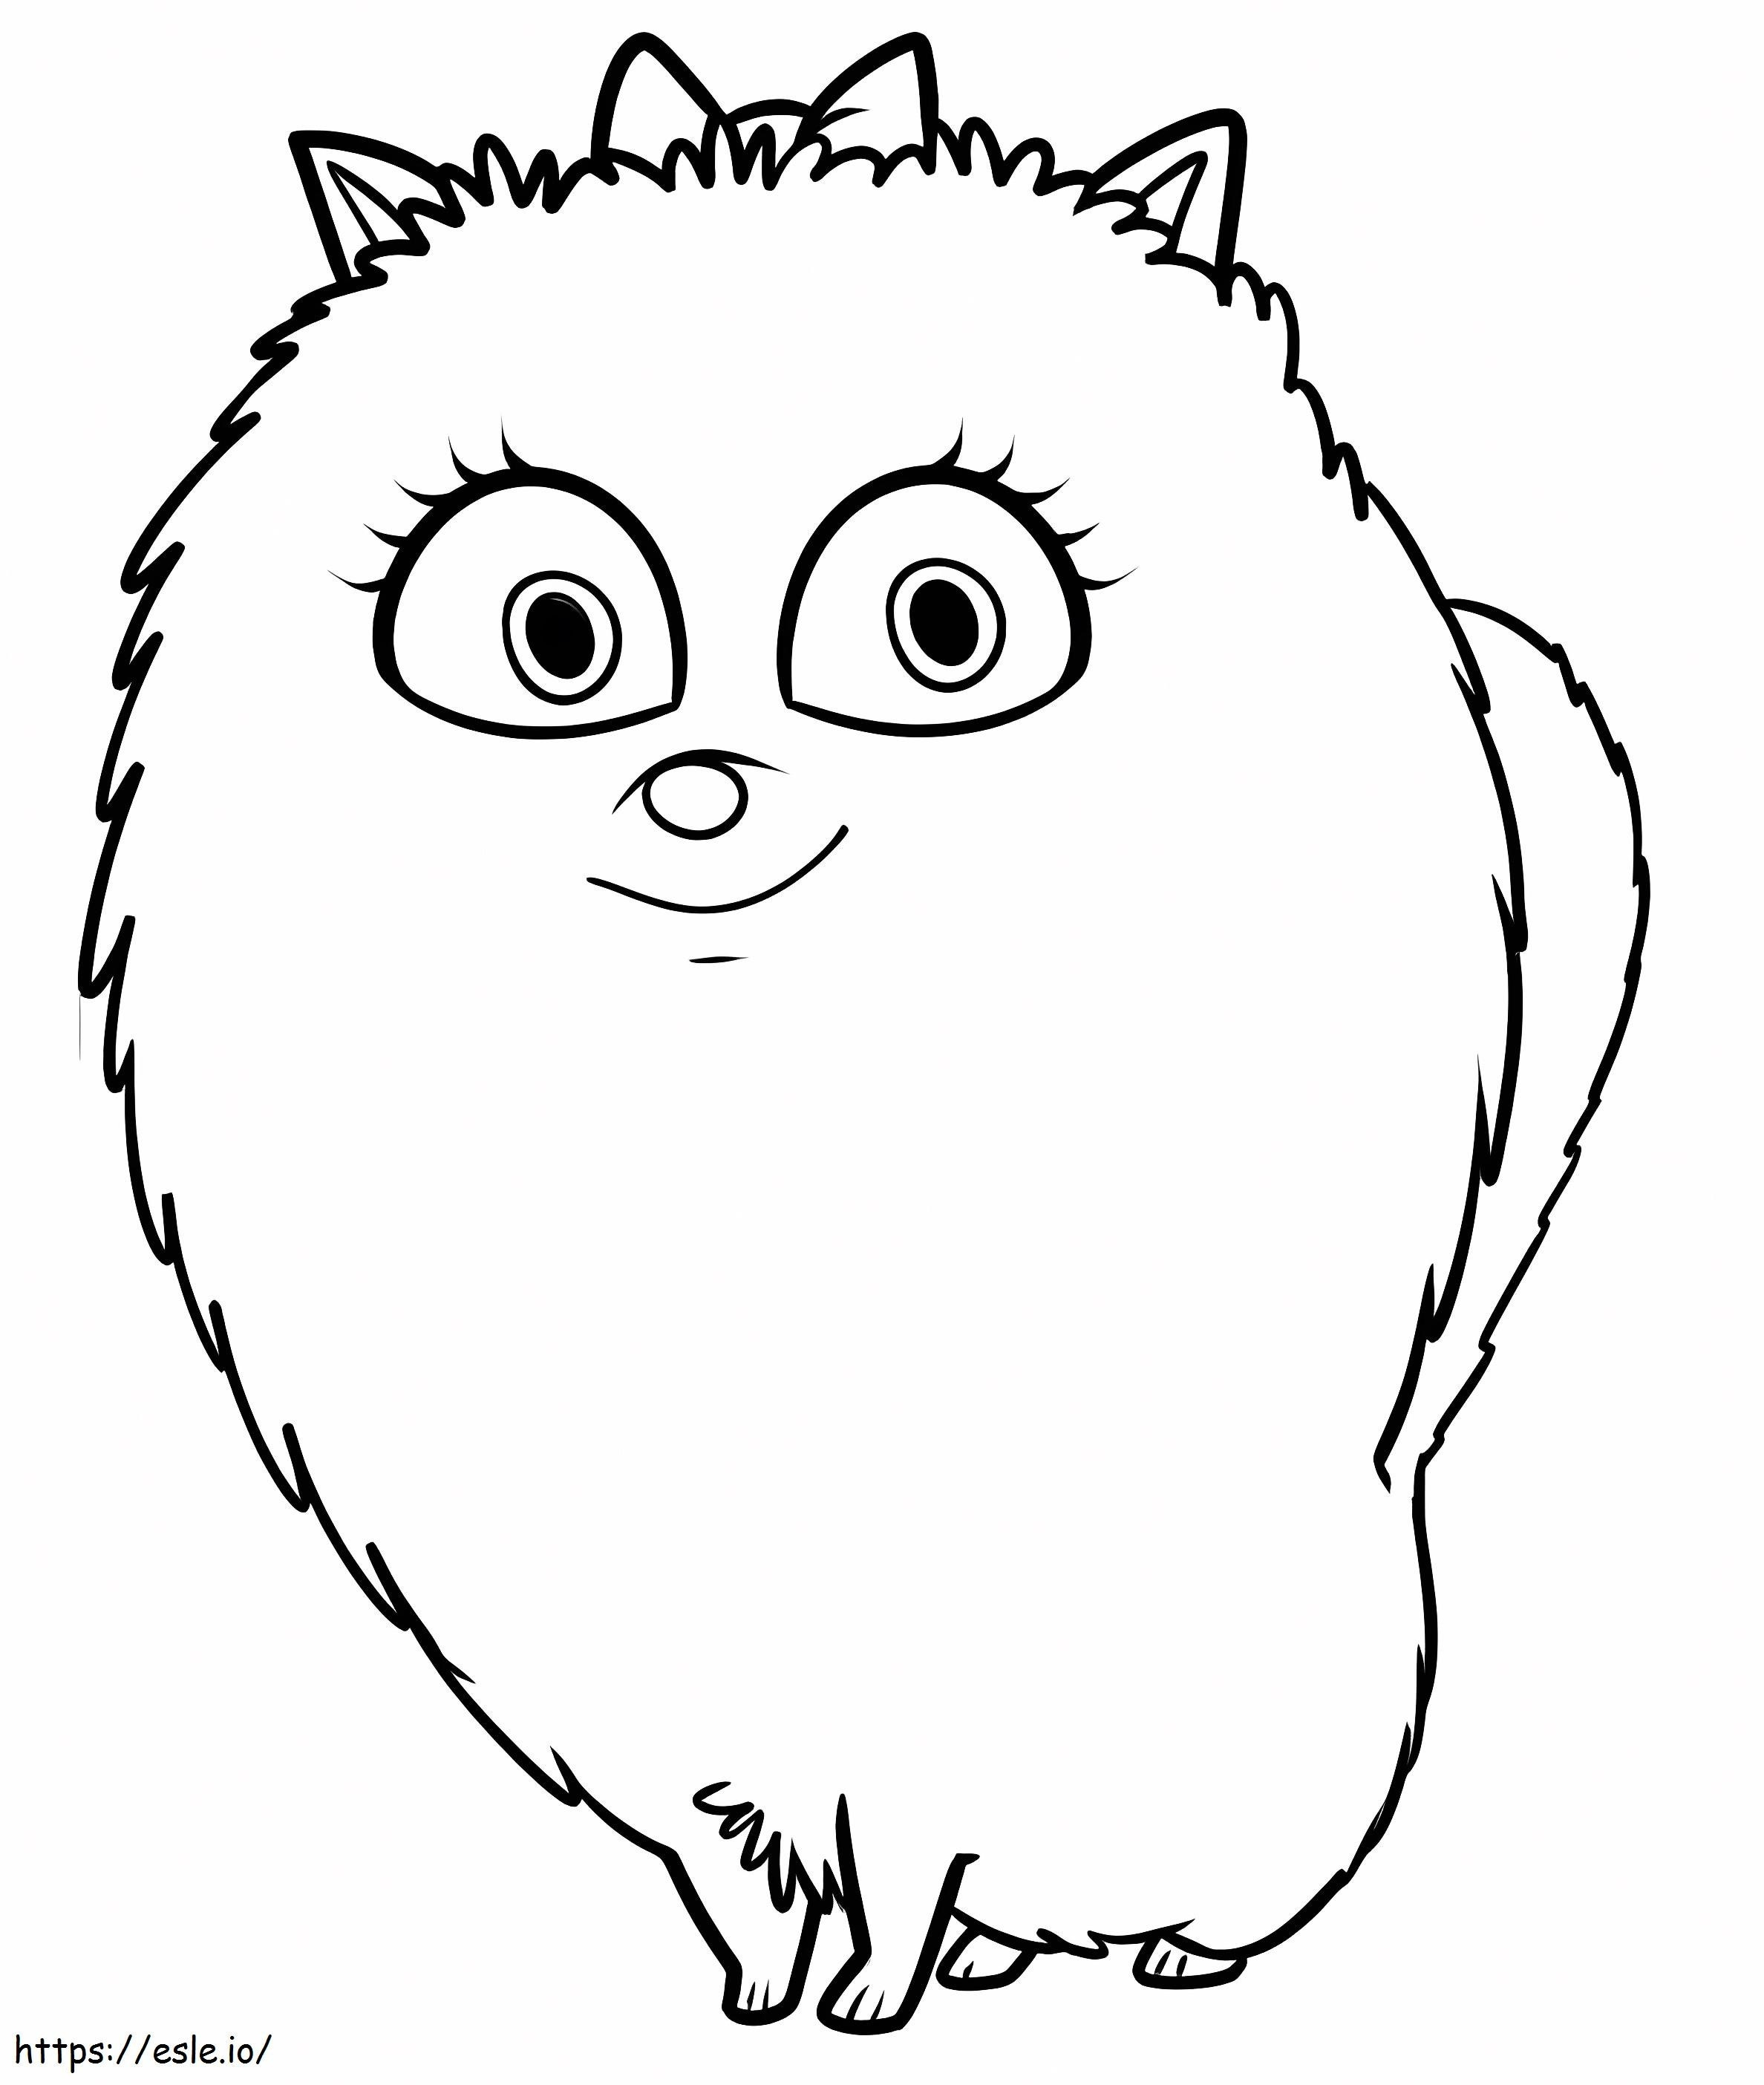 Gidget Is Smiling coloring page